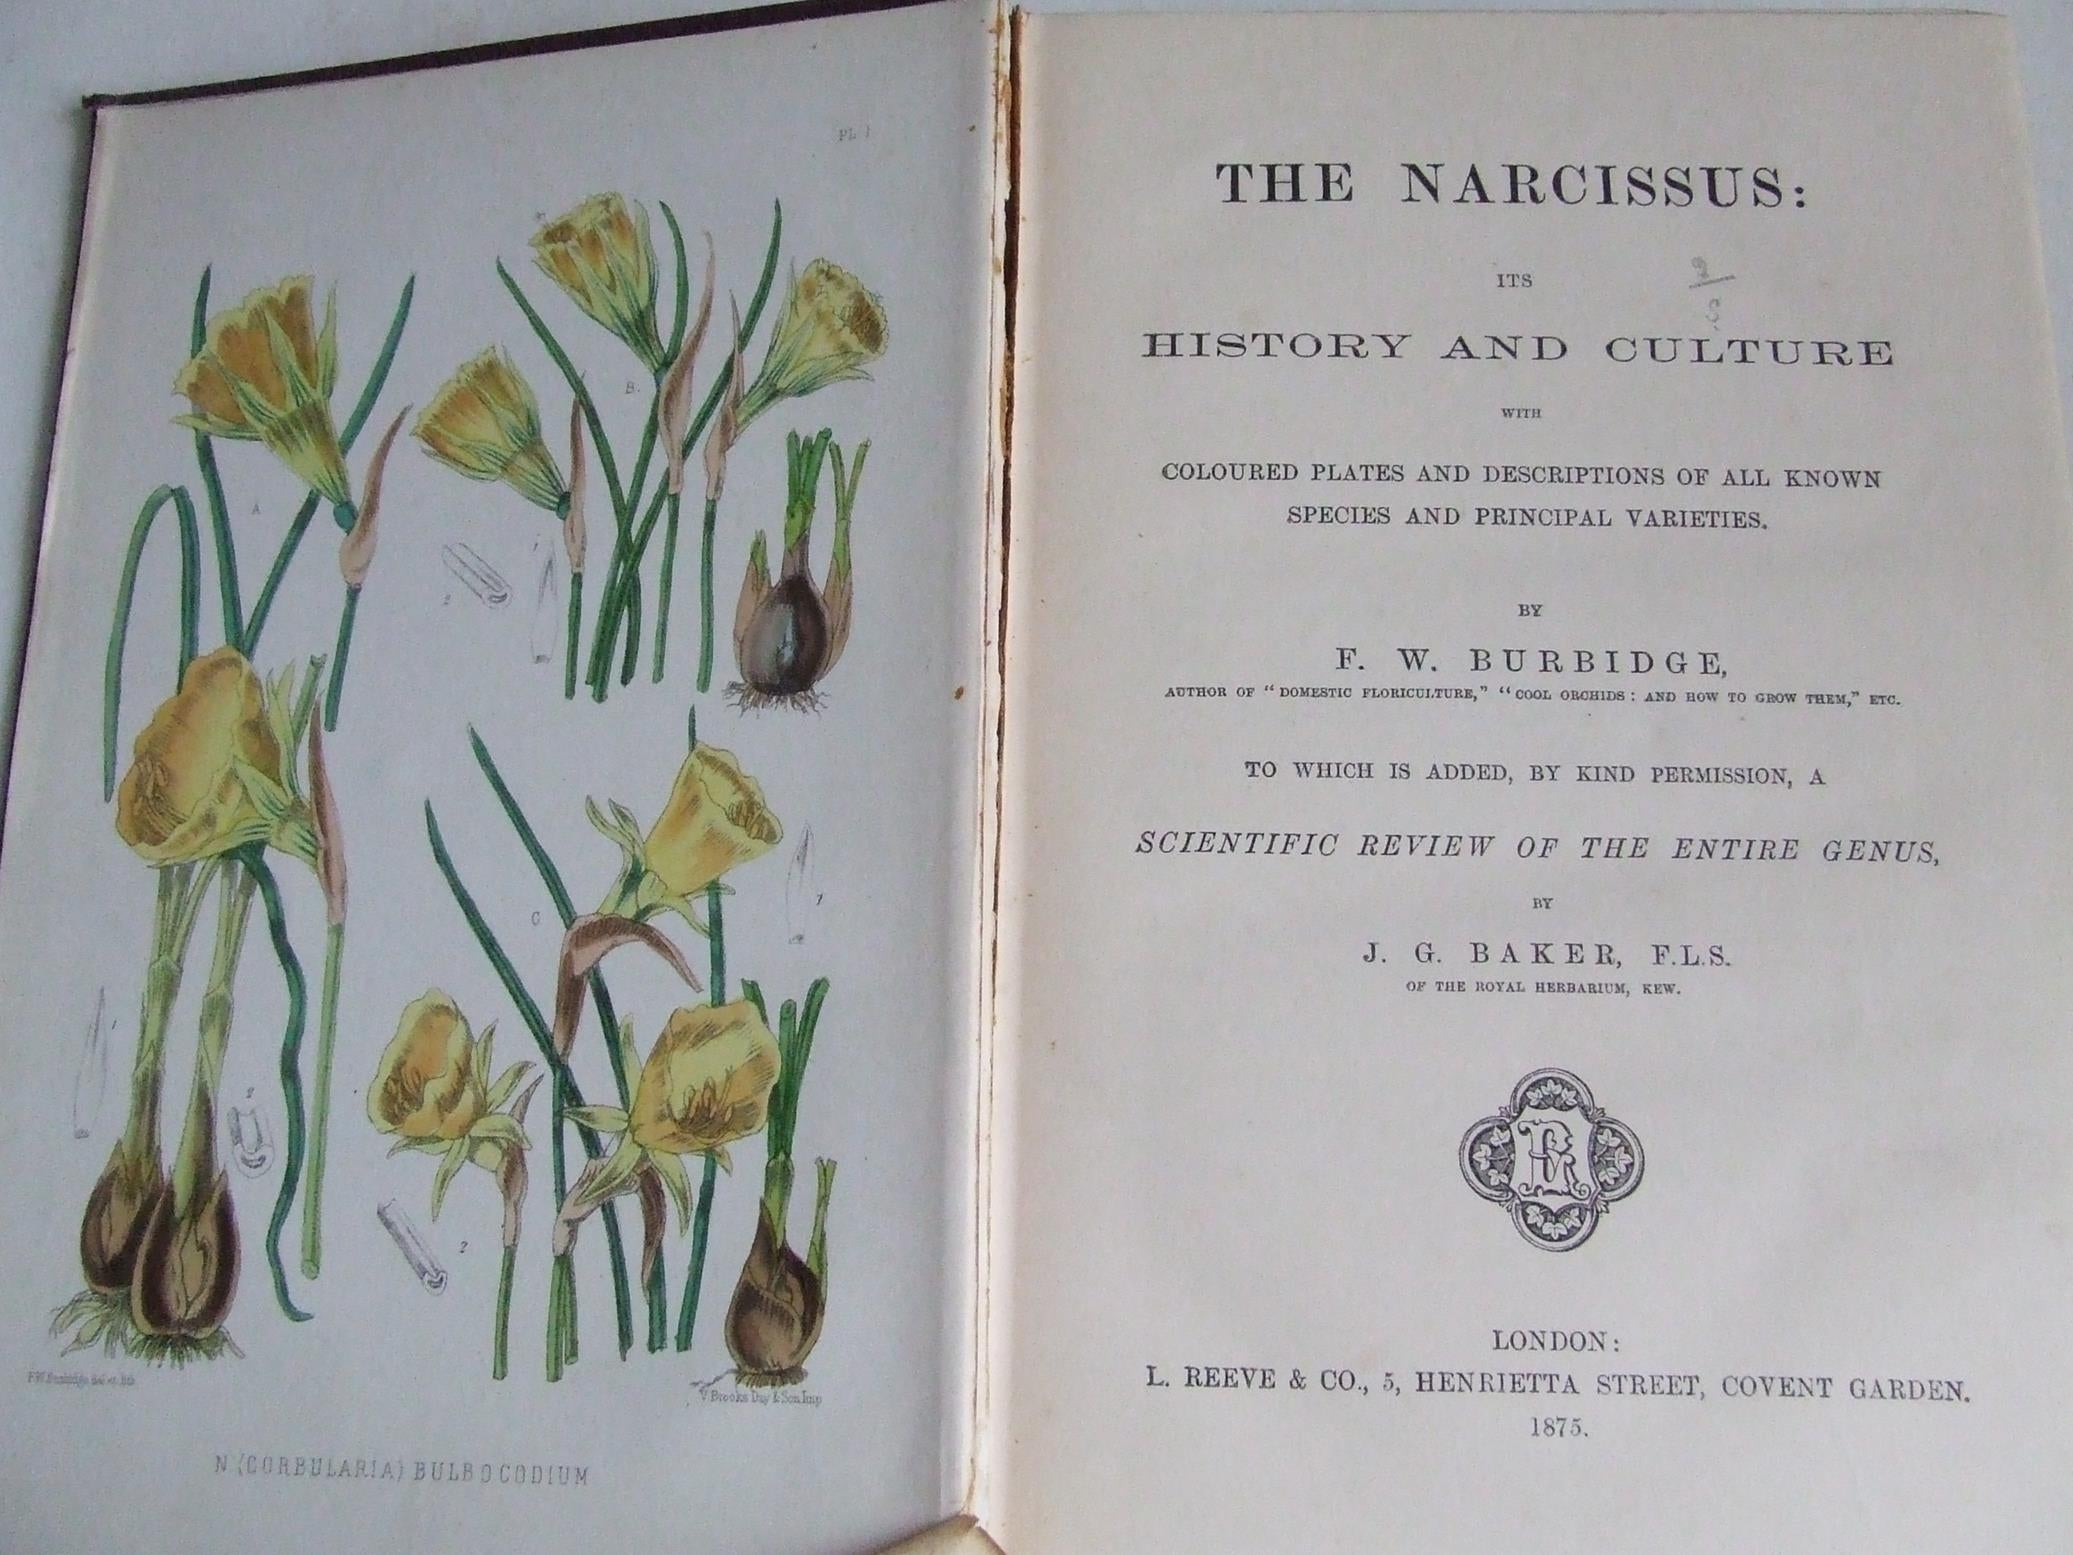 The Narcissus: its history and culture, with coloured plates and descriptions of all known species and principal varieties